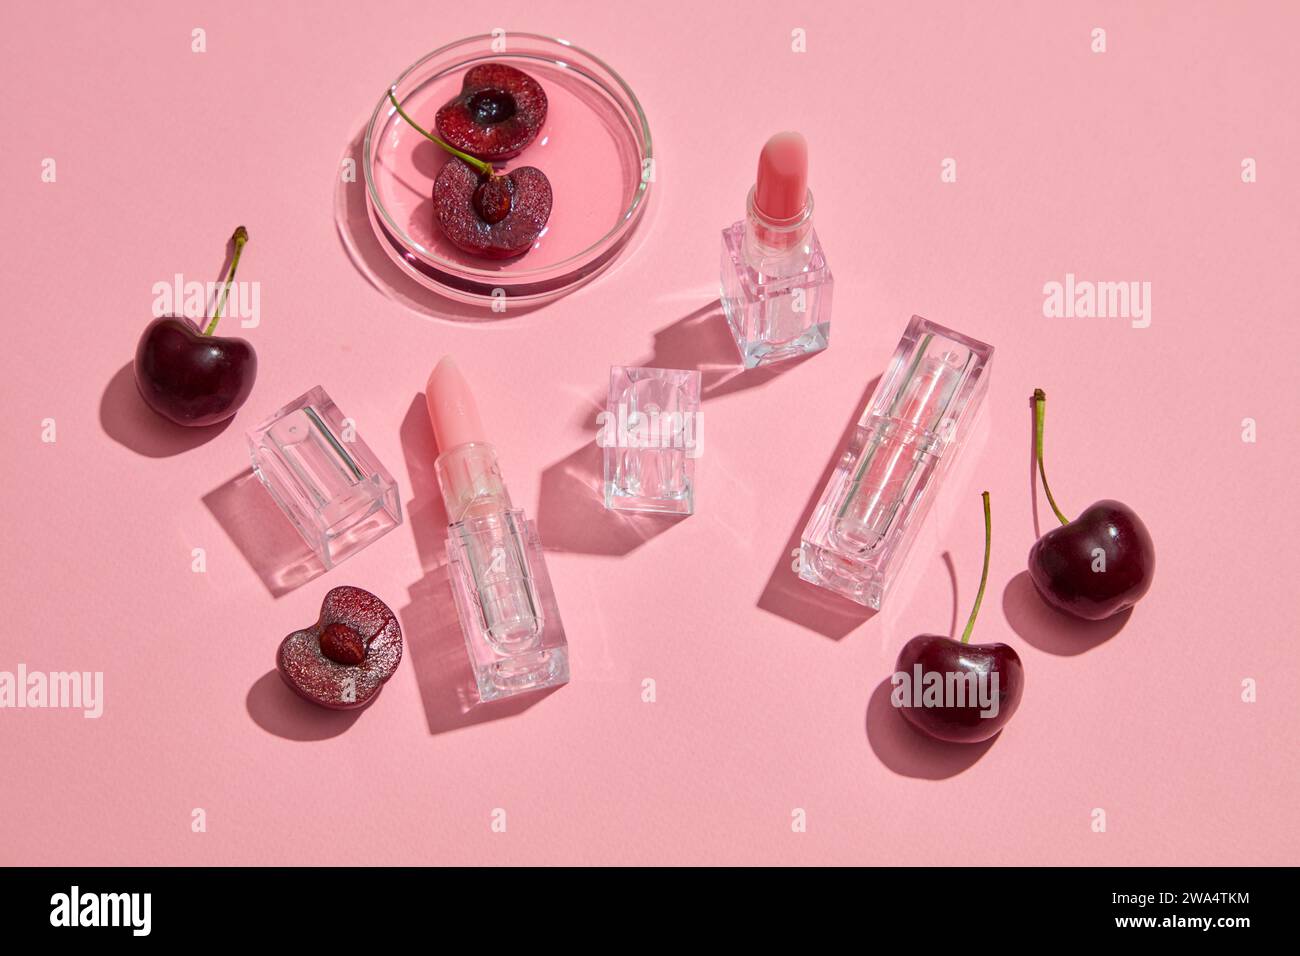 Against the pink background, cute lipsticks with transparent outer shell decorated with fresh cherries. Cherry red is a very popular lipstick color lo Stock Photo